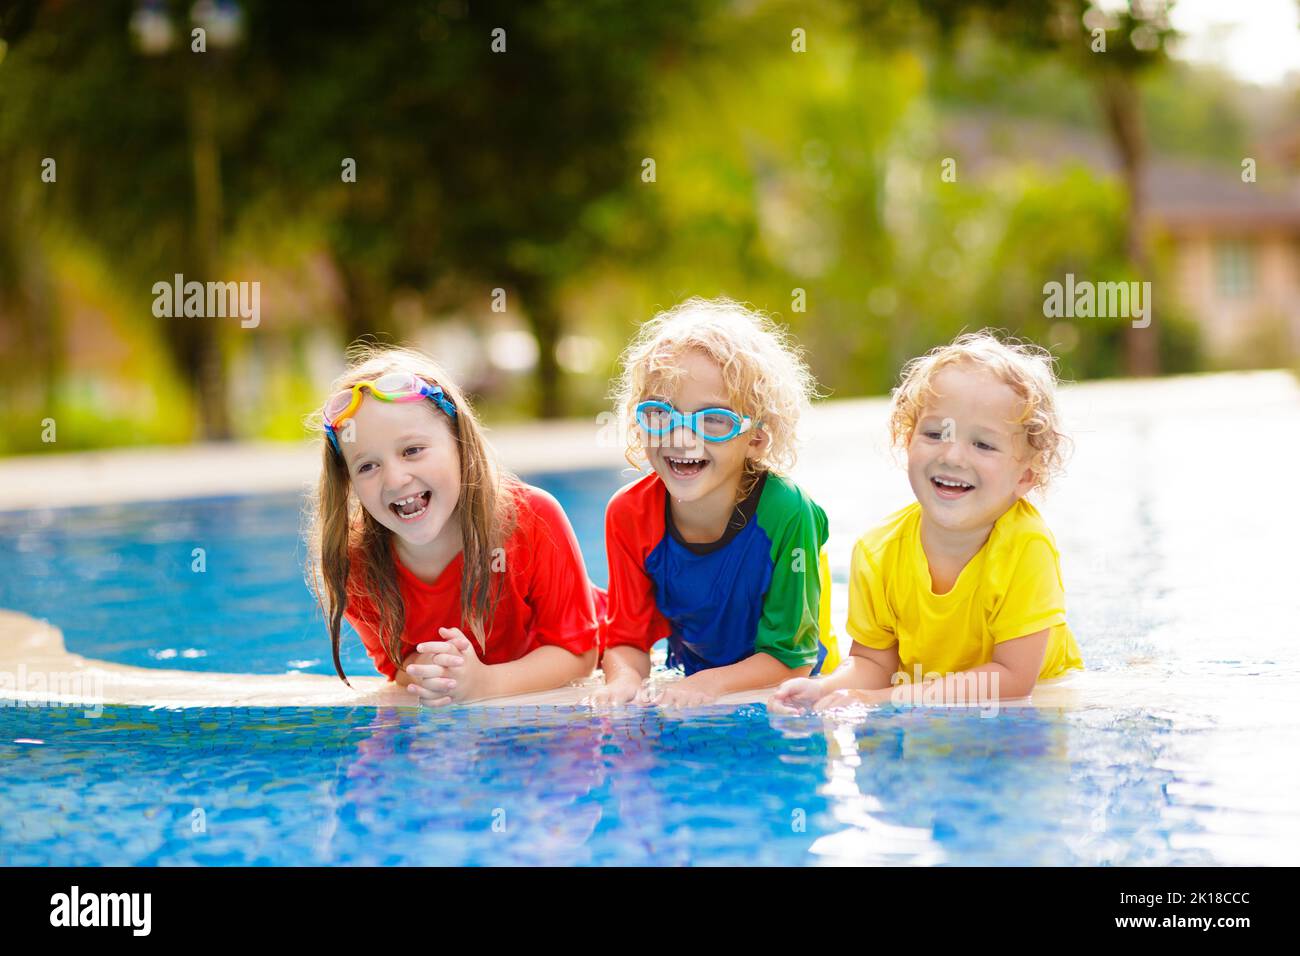 Kids play in swimming pool. Children learn to swim in outdoor pool of tropical resort during family summer vacation. Water and splash fun for young ki Stock Photo